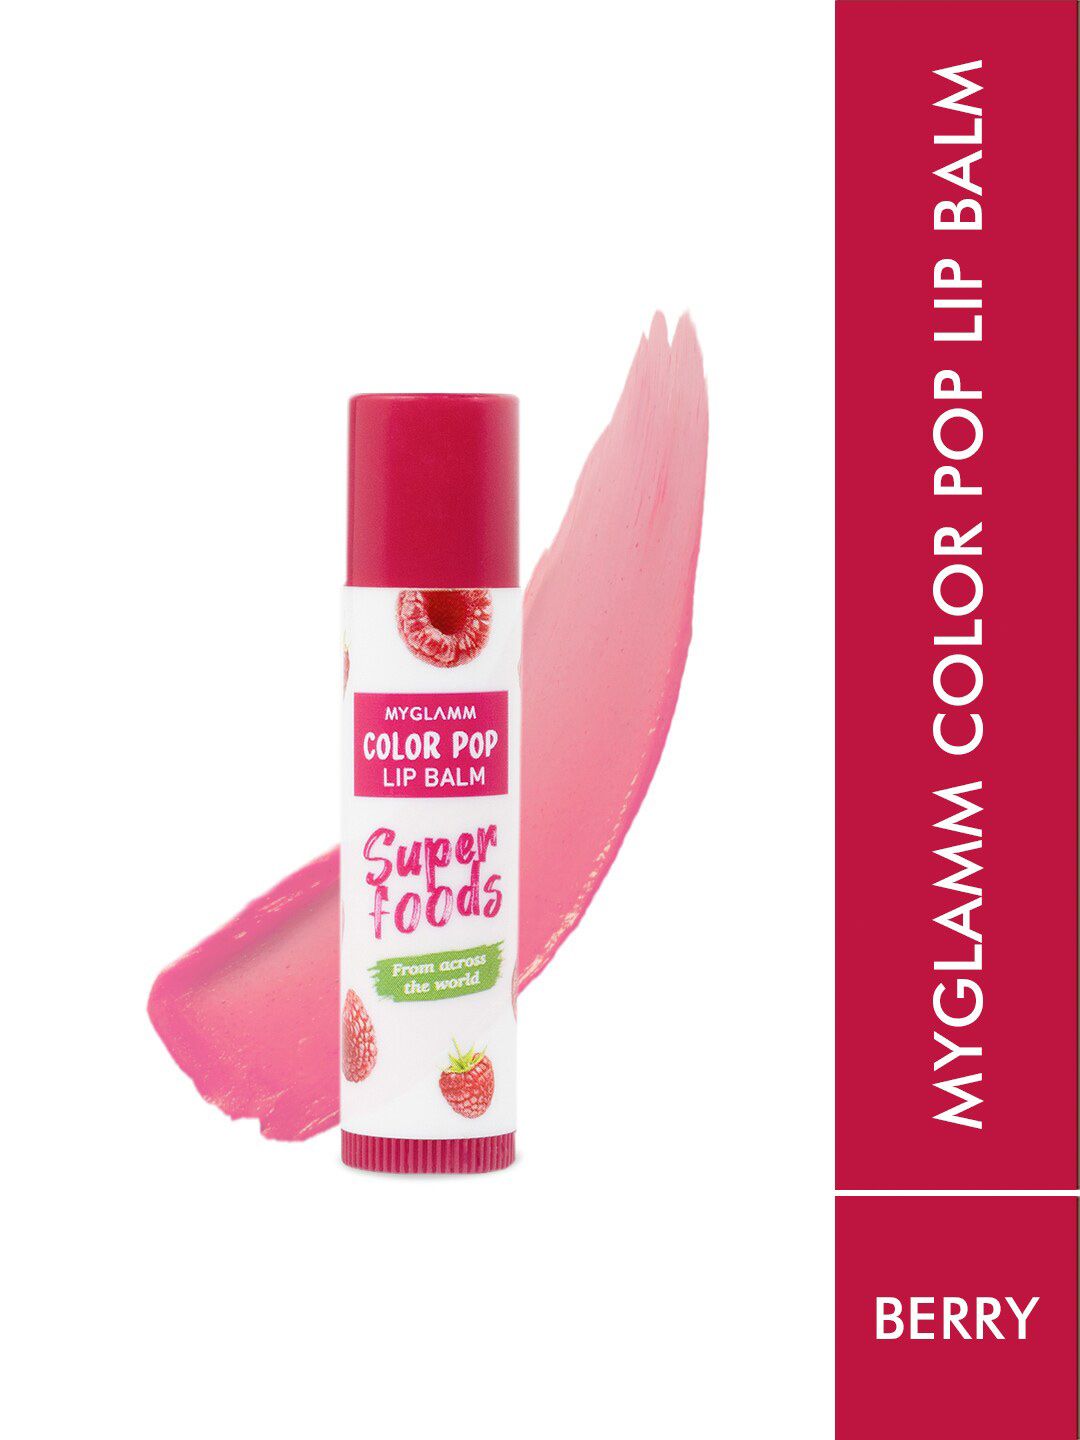 MyGlamm Color Pop Lip Balm-Berry-4.6g Price in India